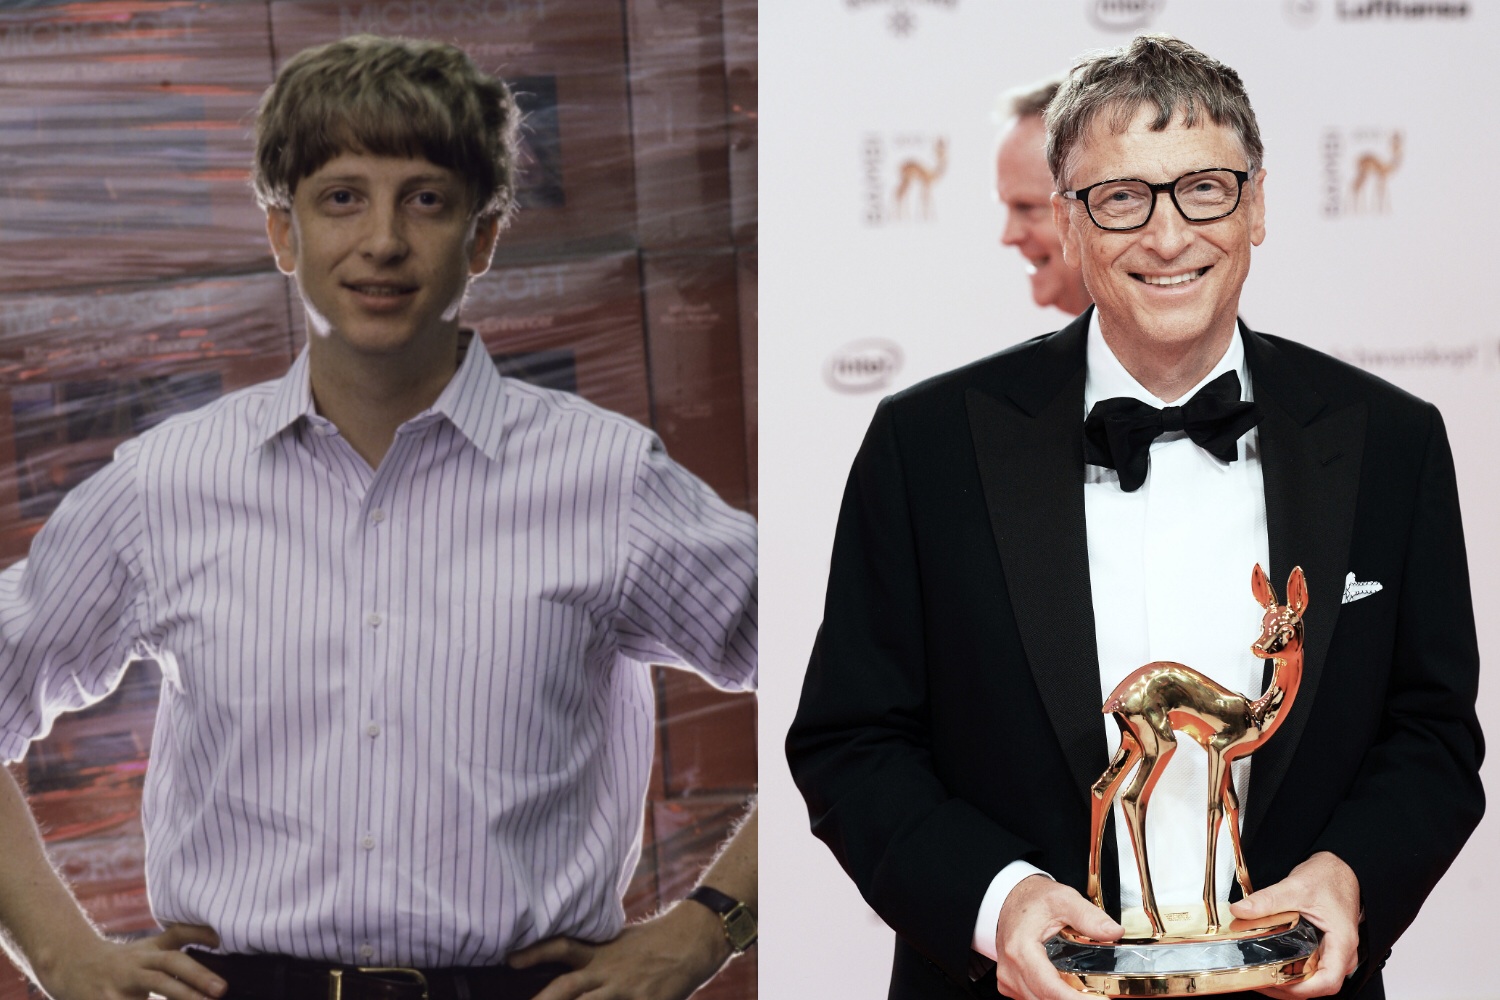 Bill Gates surrounded by copies of Windows in 1986 and in November, accepting the Bambi Award in Berlin. (Joe McNally—Hulton Archive/Getty Images, Franziska Krug—German Select/Getty Images)